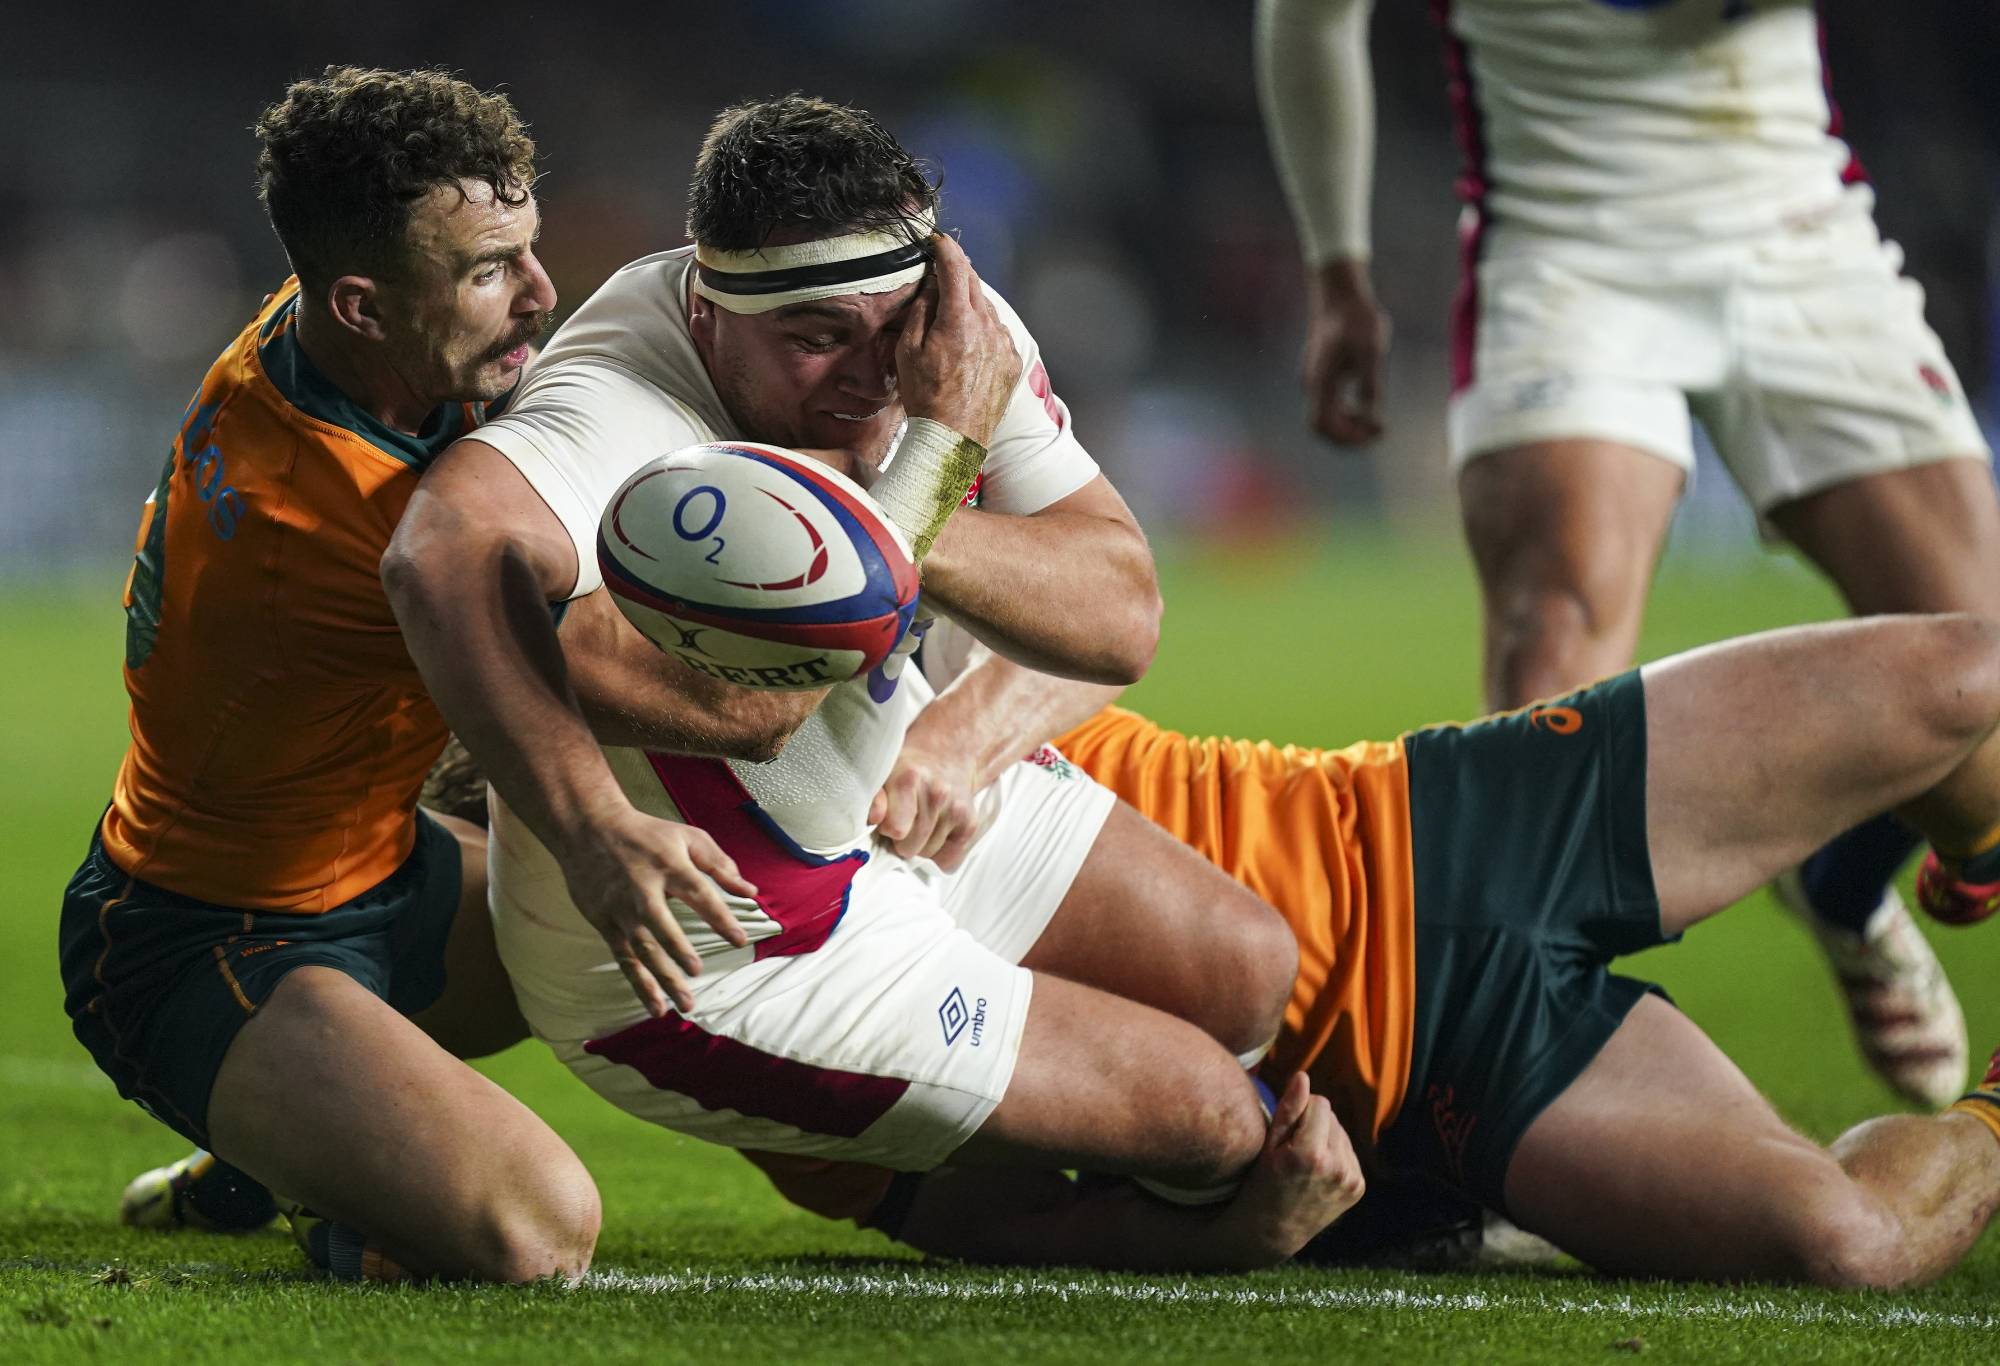 Australia's Nic White (left) tackles England's Jamie George (right) as he almost scores a try during the Autumn International match at Twickenham Stadium, London. Picture date: Saturday November 13, 2021. (Photo by Mike Egerton/PA Images via Getty Images)